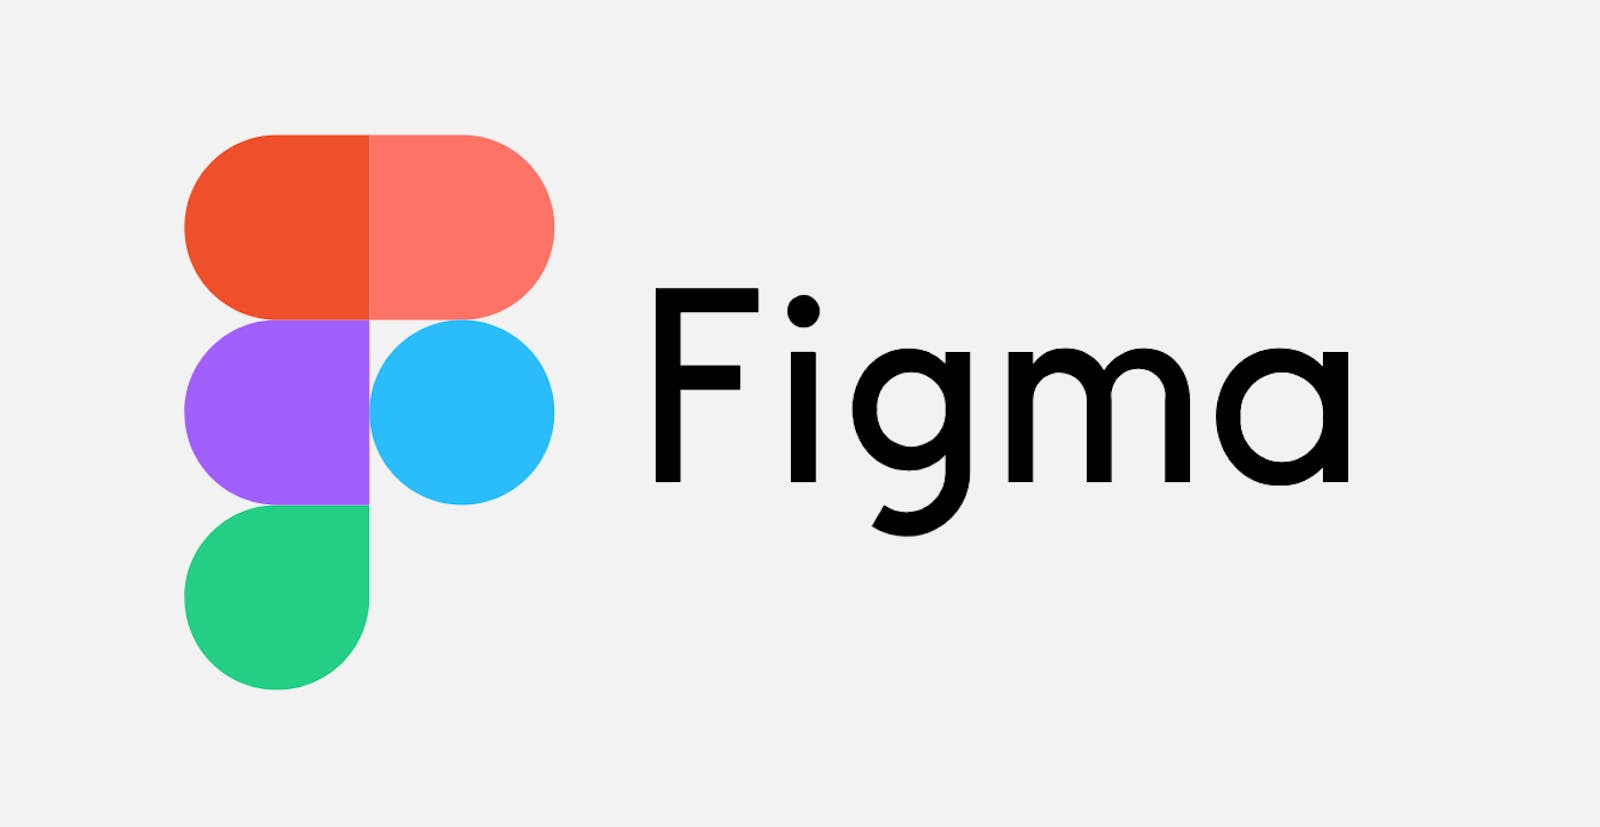 Empower Your Design Workflow with Figma: A Collaborative Interface Design Tool